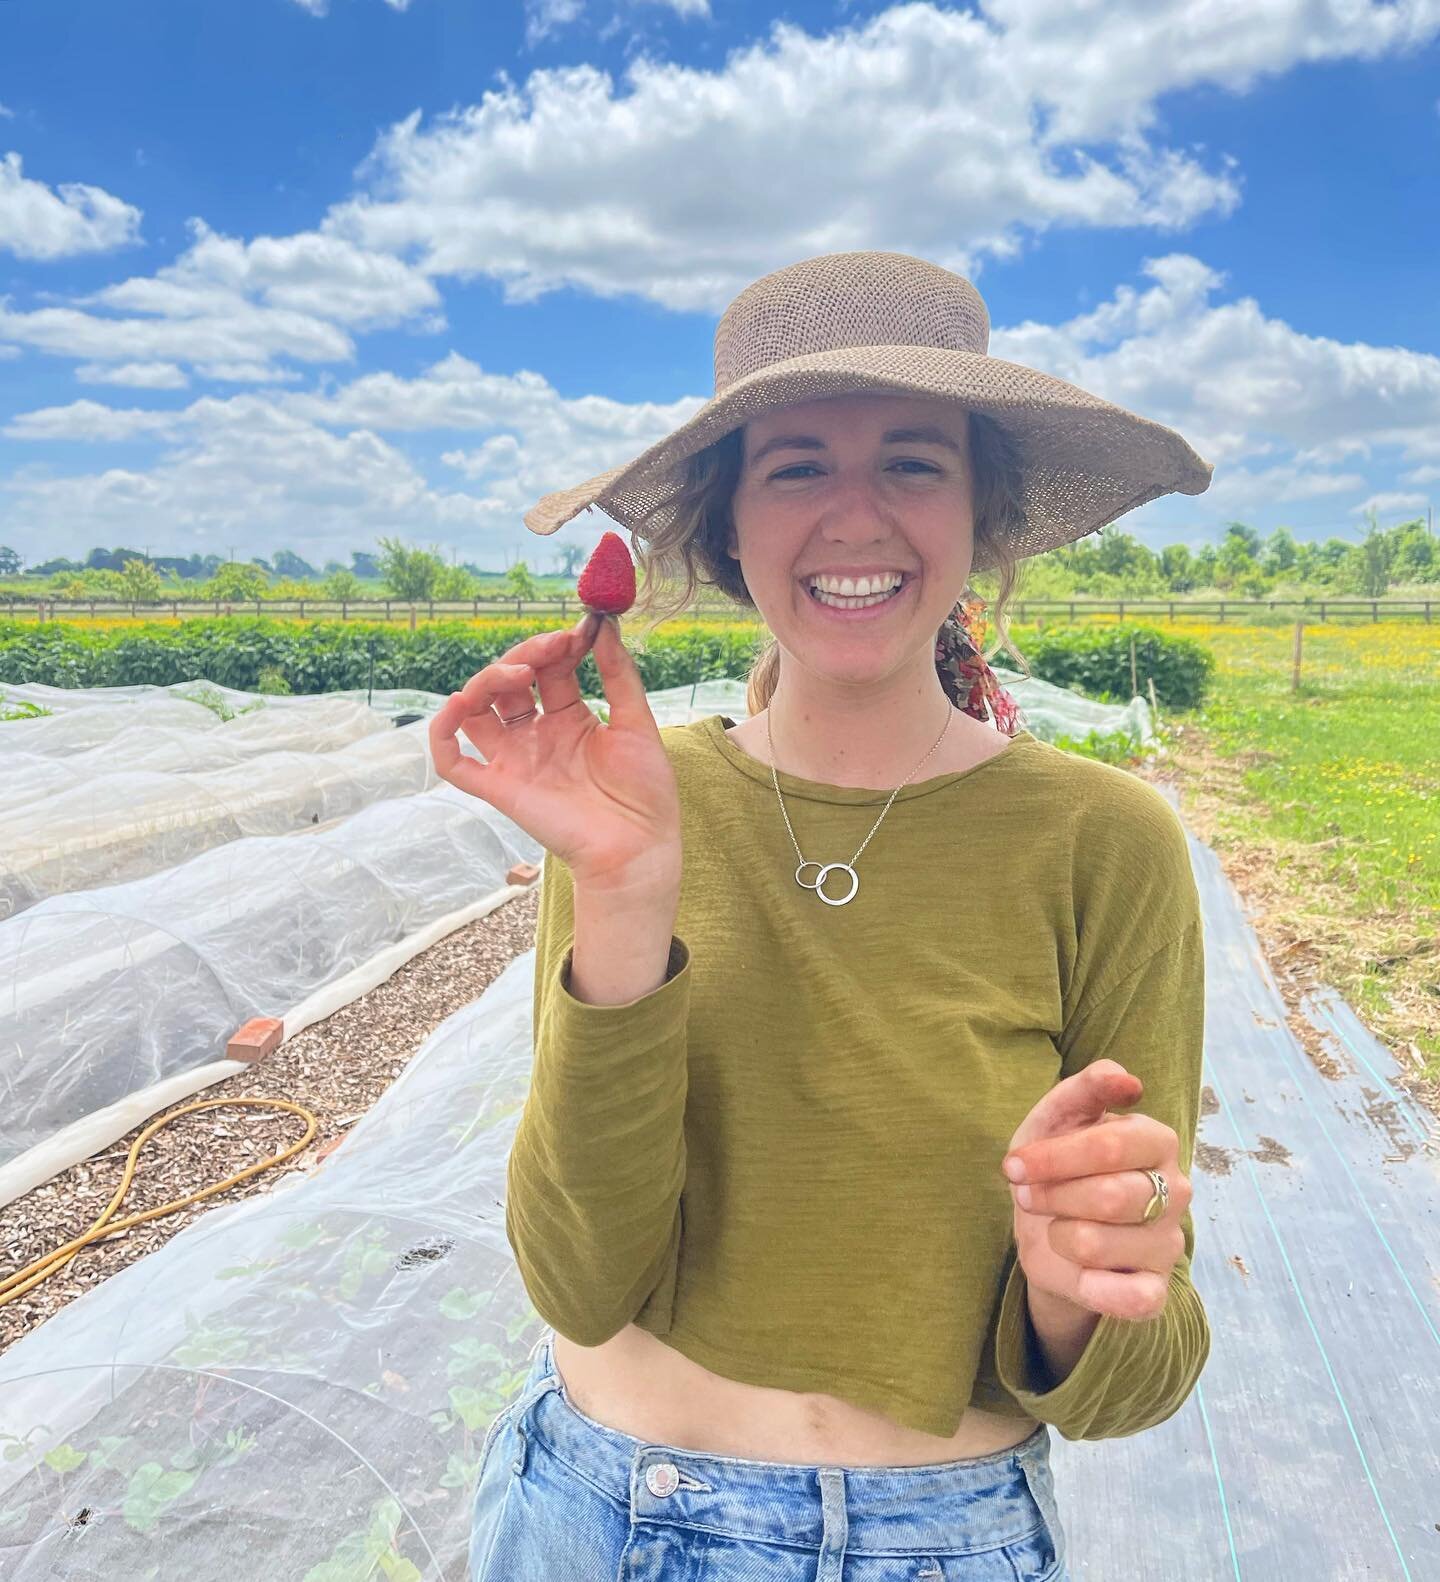 Our Lowri enjoying some of the delicious strawberries coming through at Moonacre 🍓🌞🧡
.
#smallholding #biodynamic #strawberry #frome #somerset #southwest #garden #gardeners #volunteers #love #biodynamicsmallholding